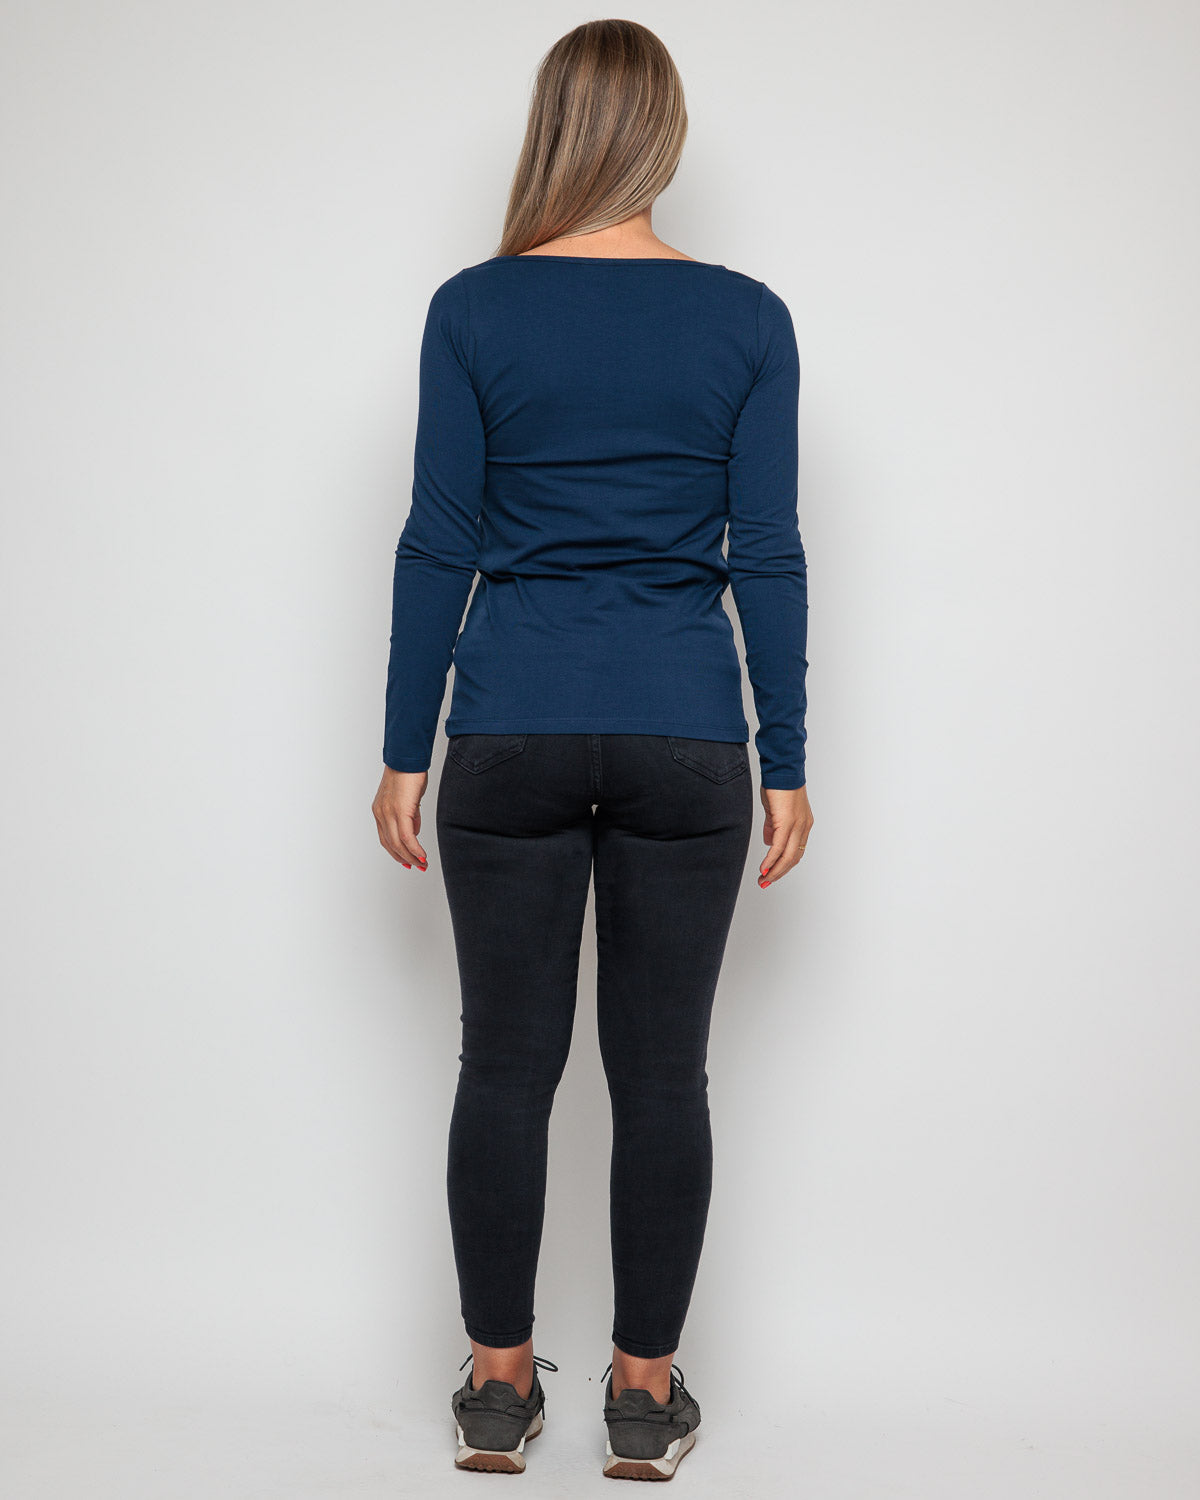 Organic Cotton Long Sleeve Top in navy blue for women